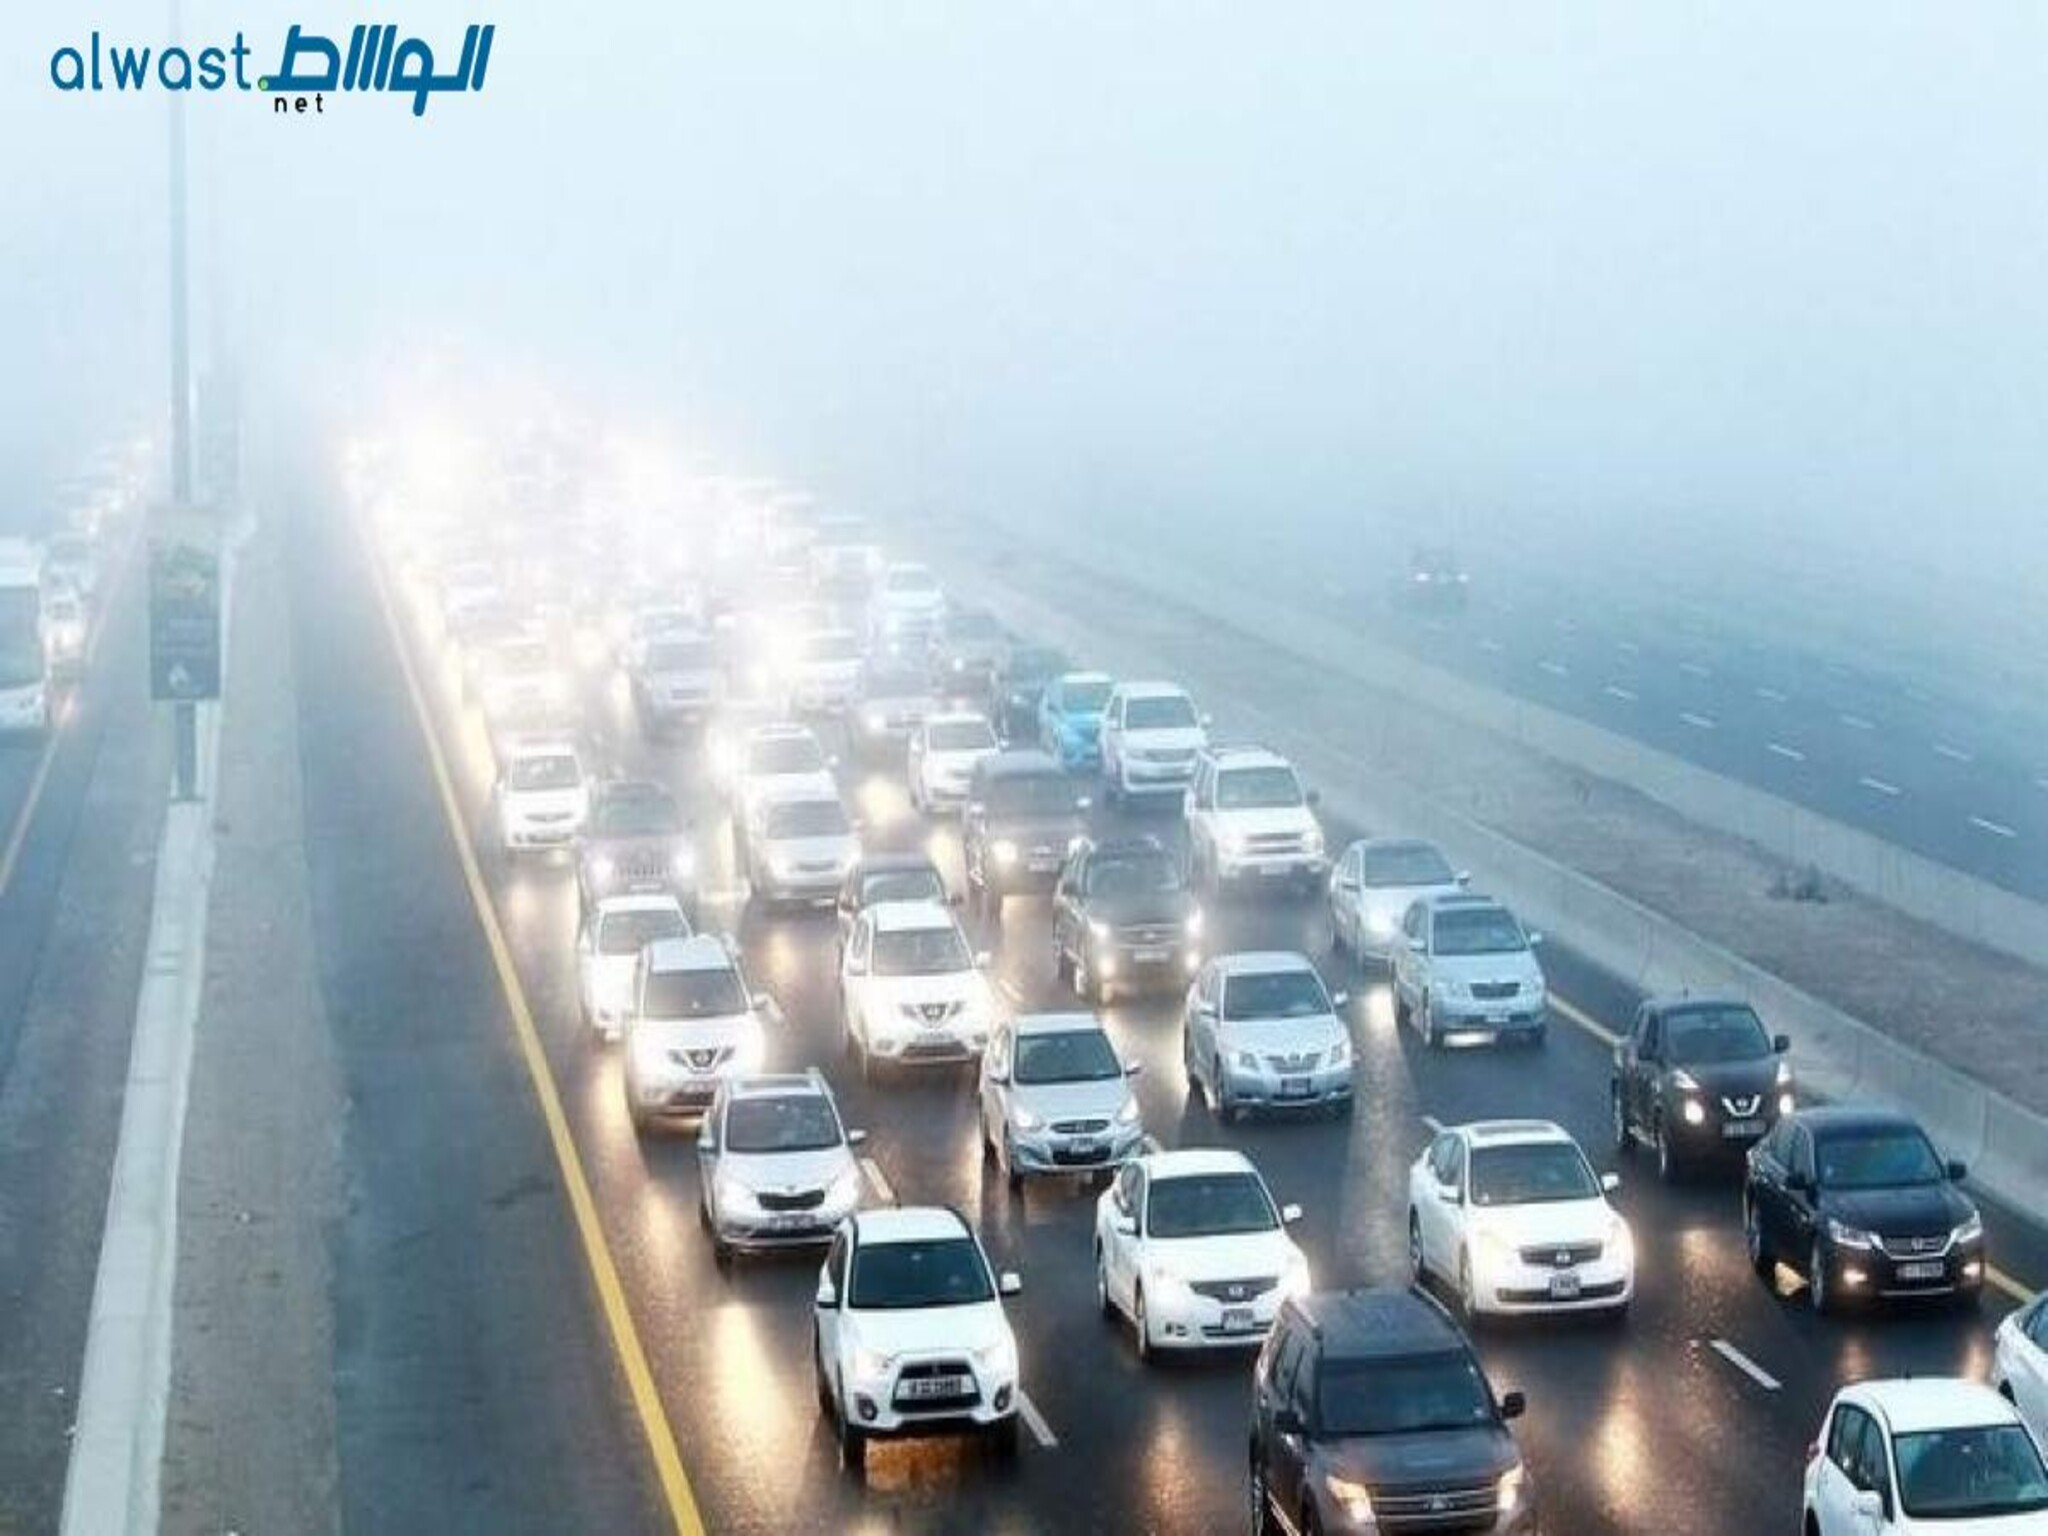 Dubai Police Urges drivers to be careful during foggy weather